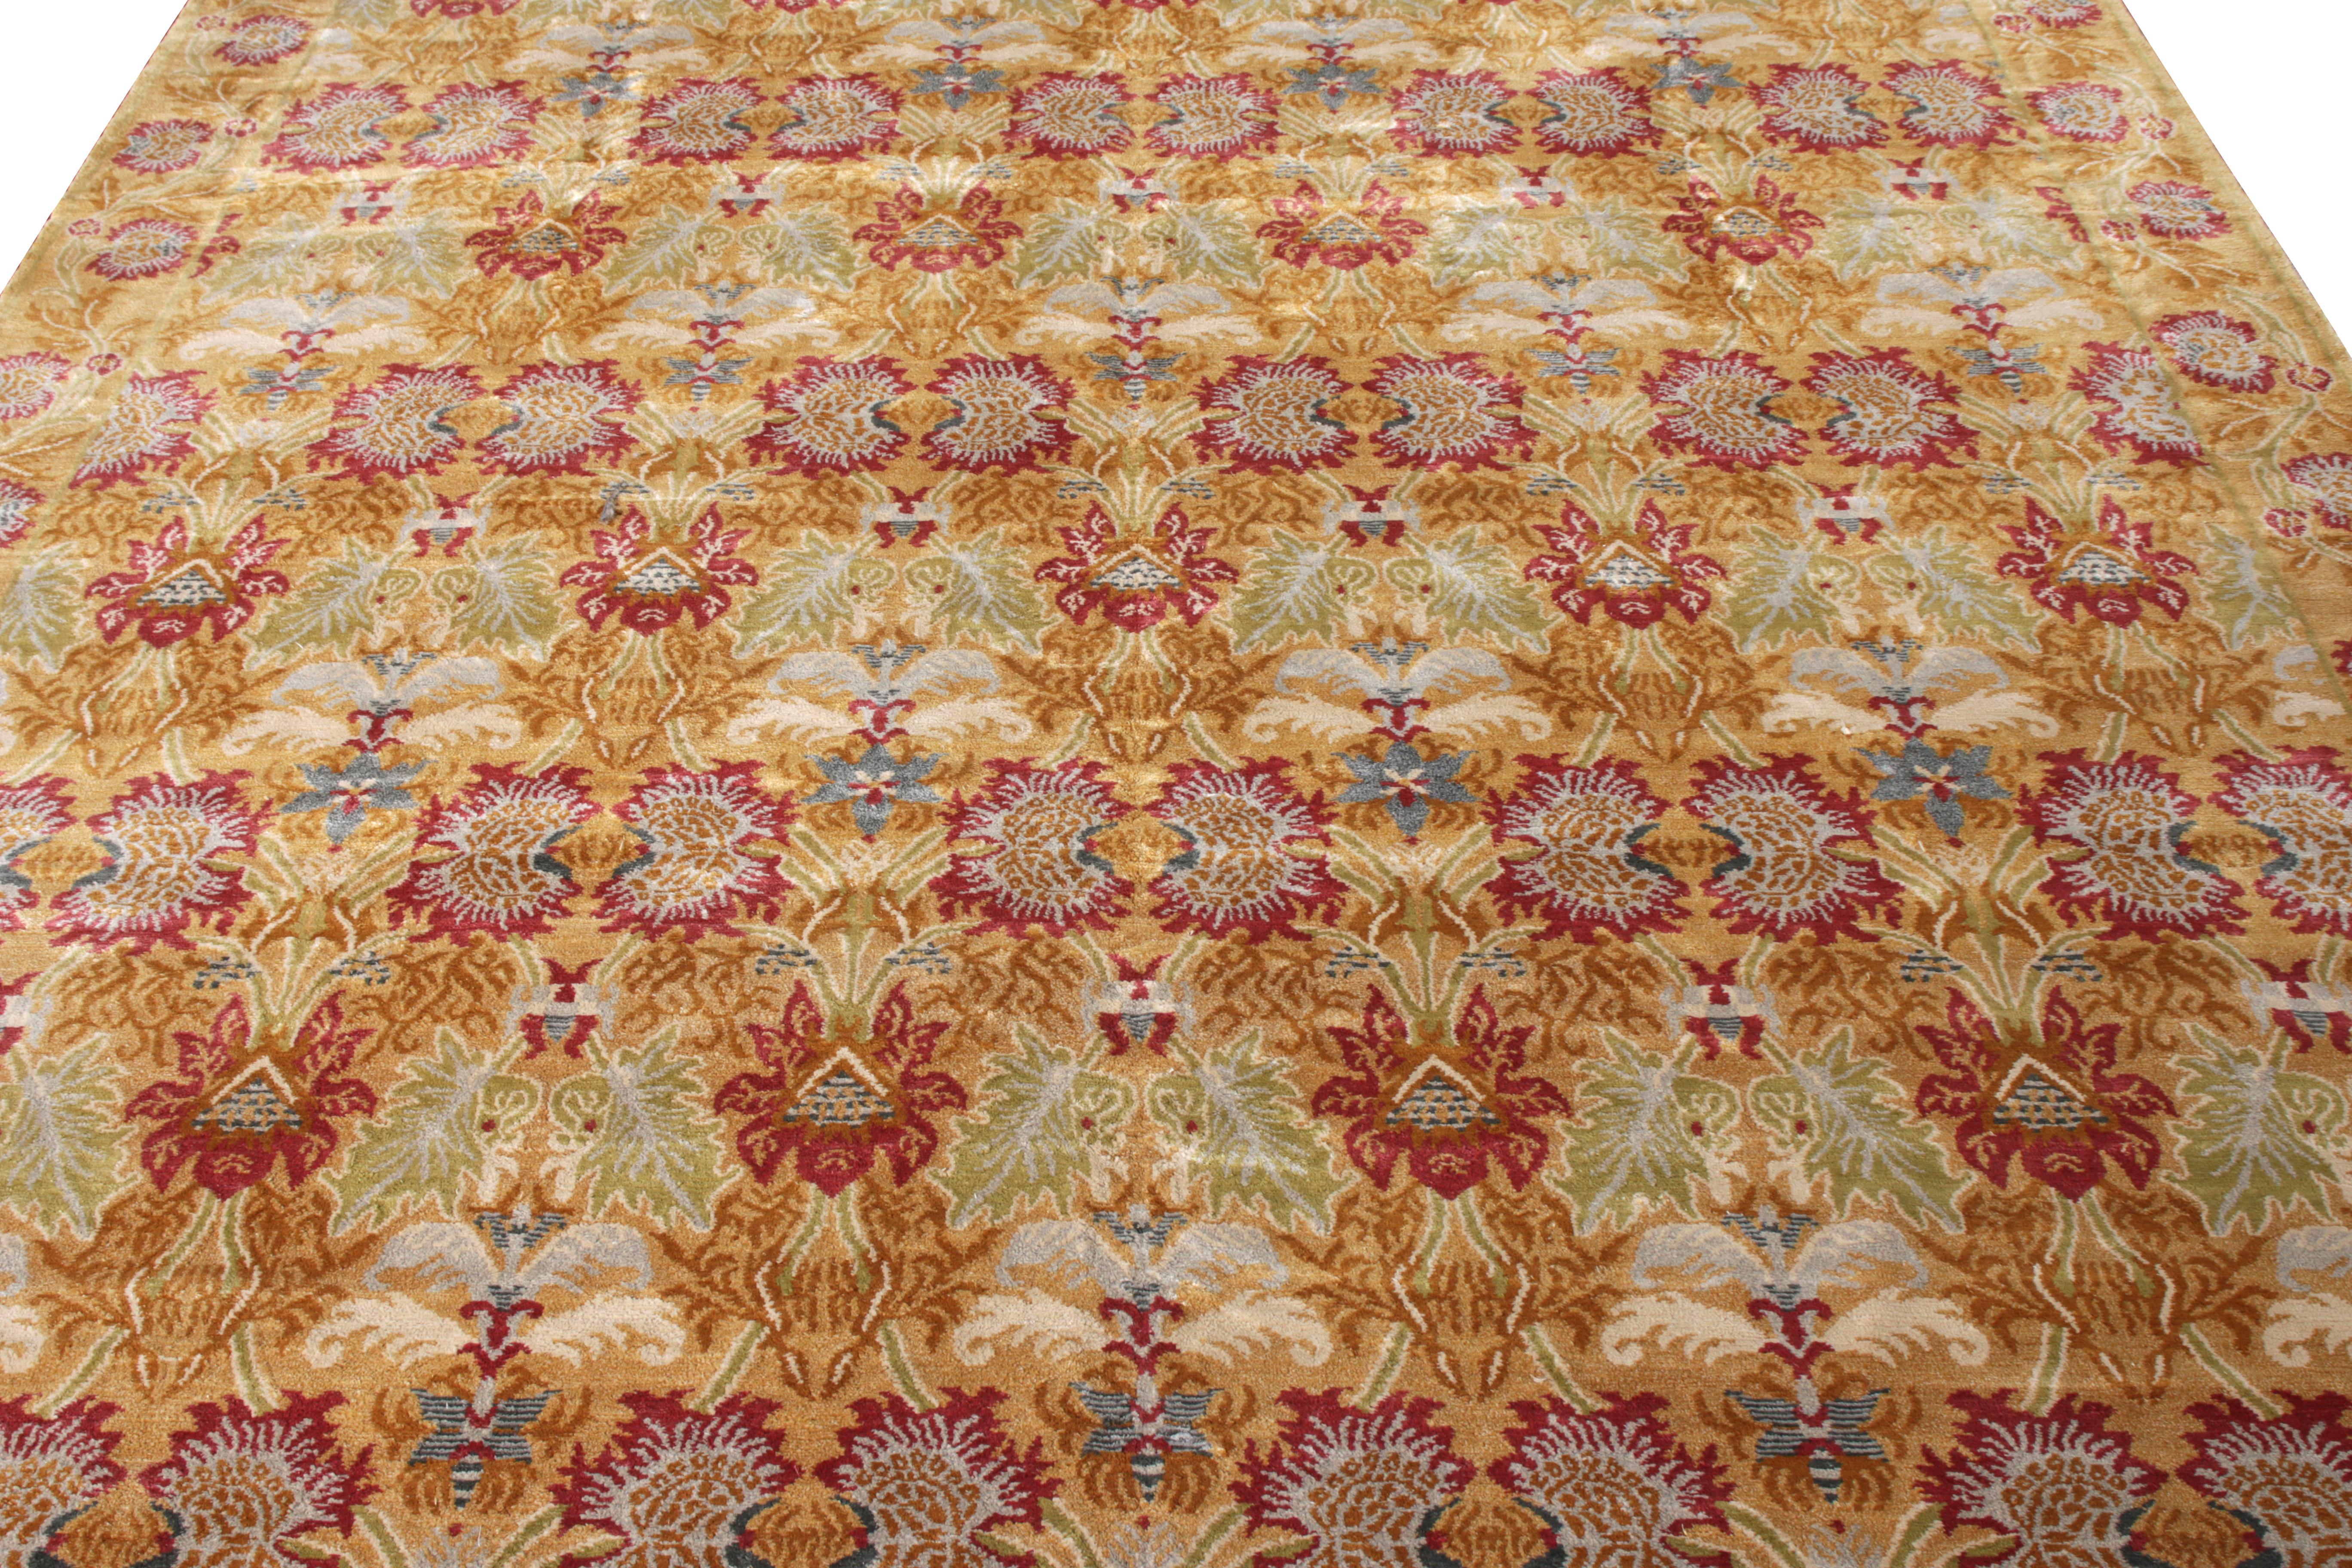 Nepalese Rug & Kilim’s European Style Rug in Gold and Red All over Floral Pattern For Sale